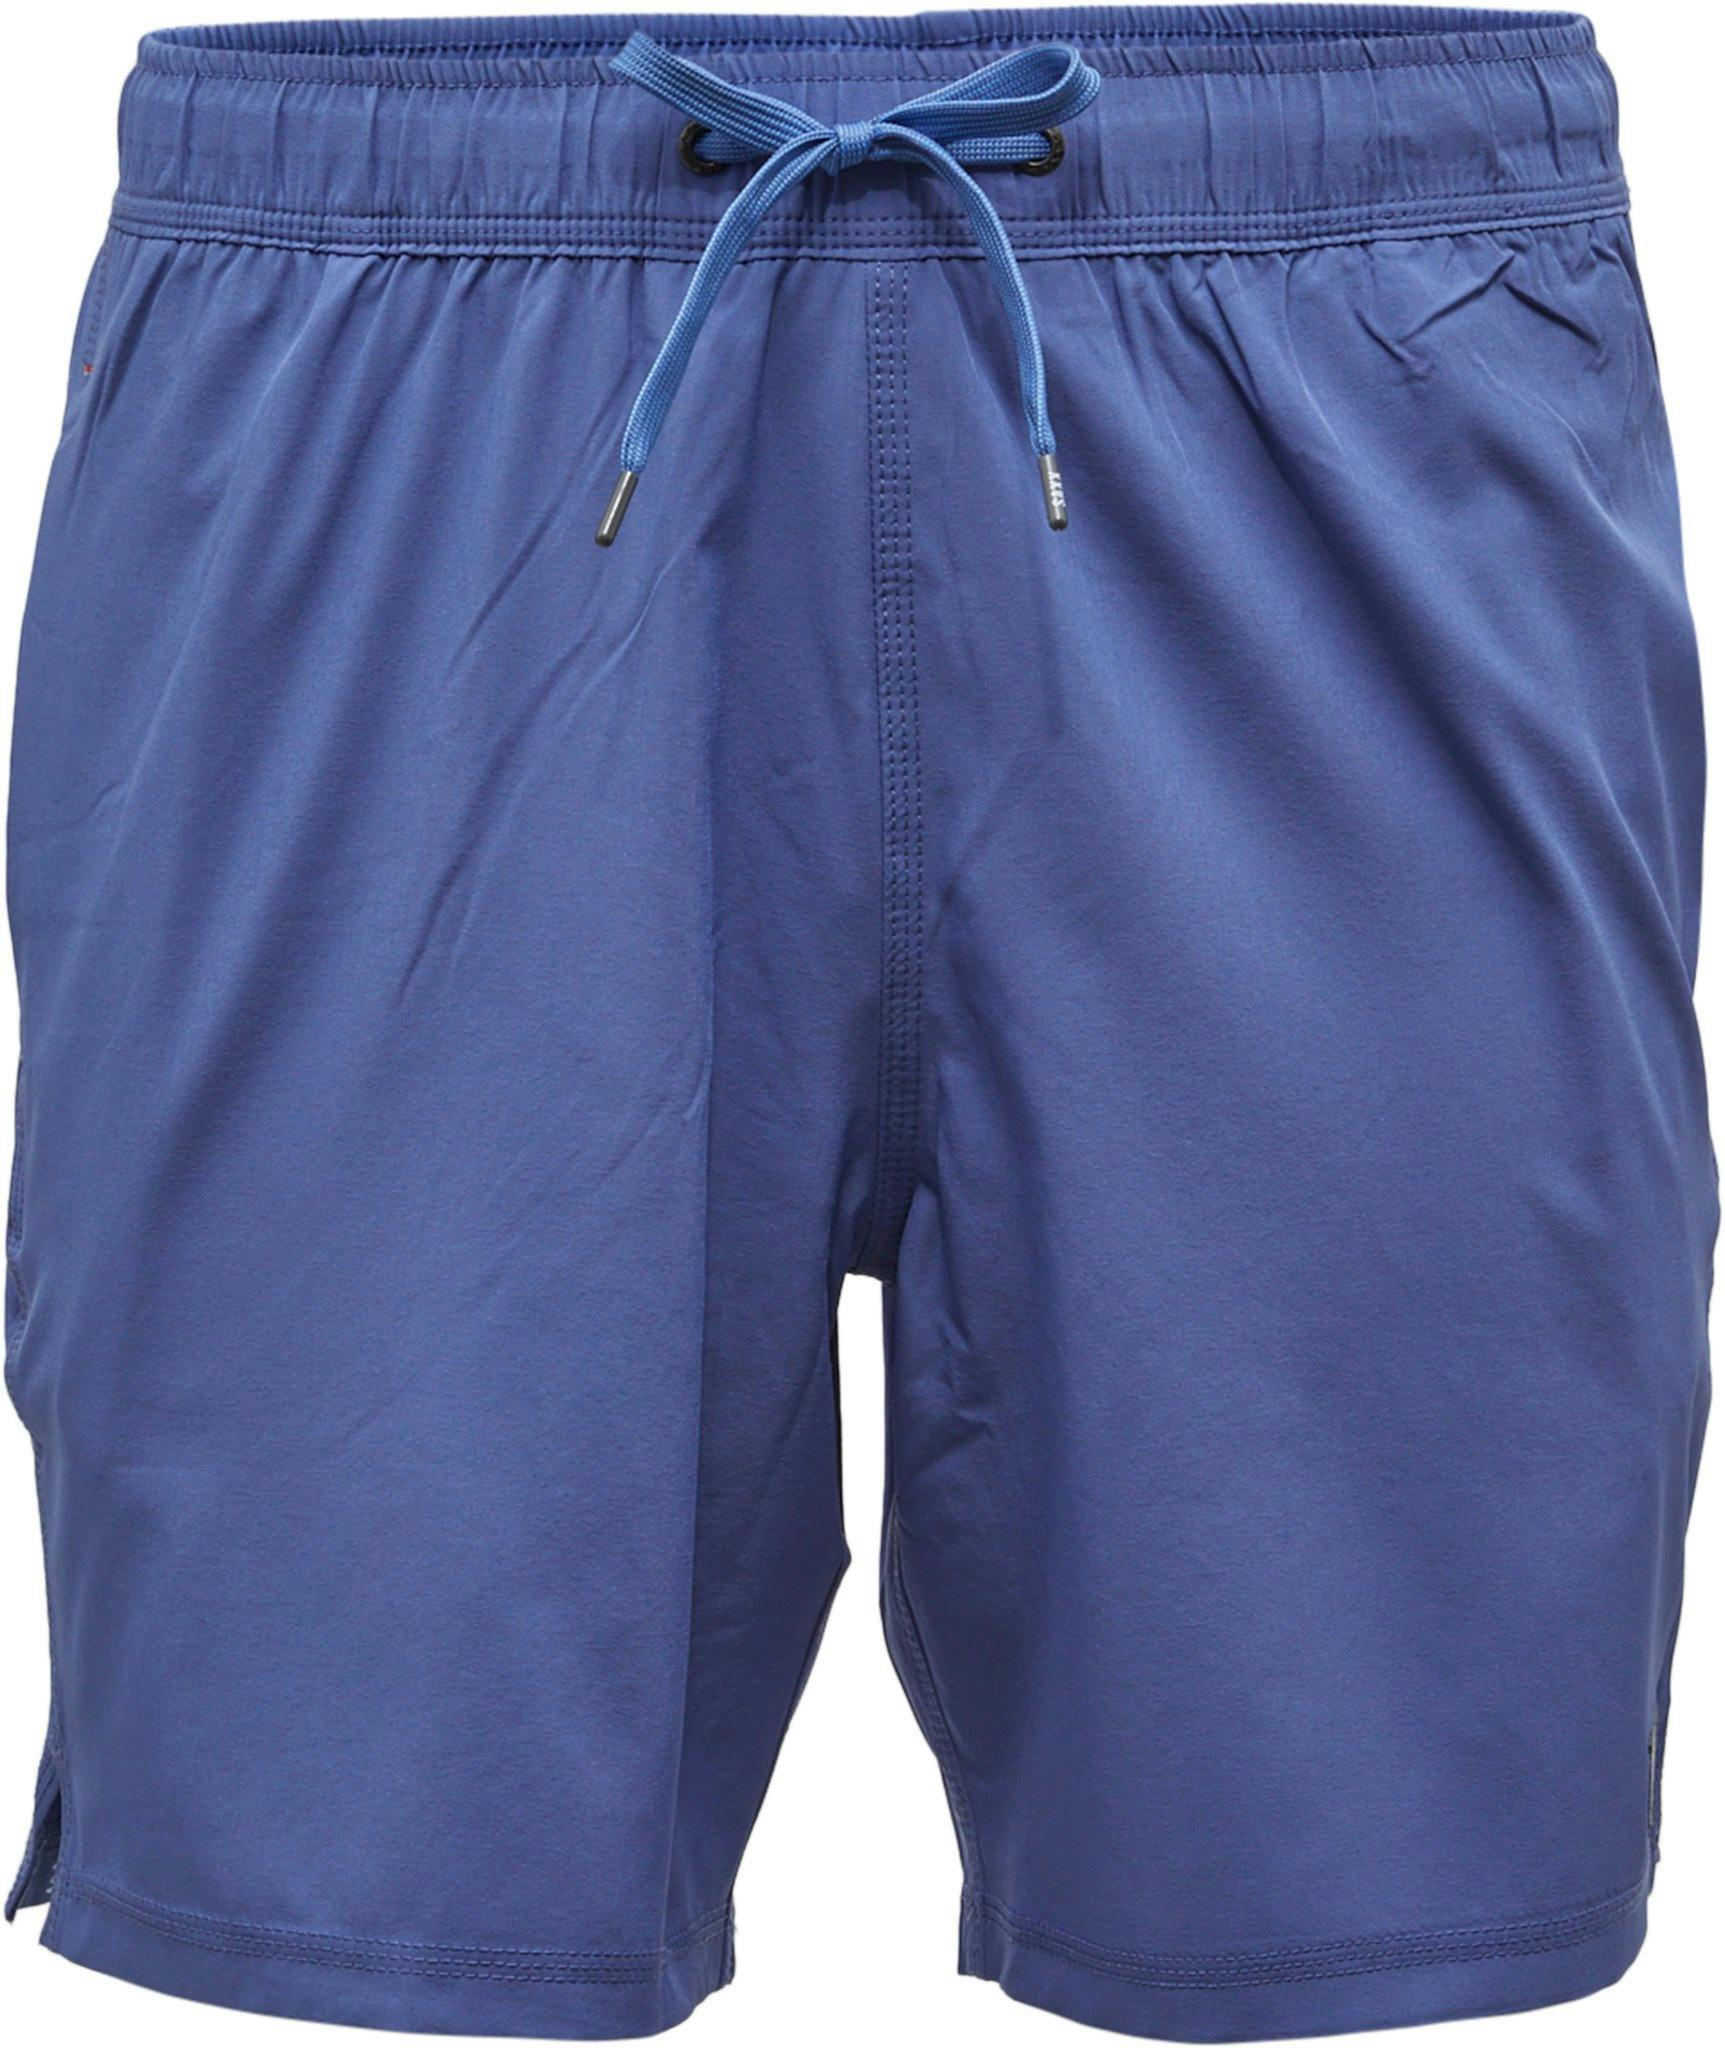 Product image for Oh Buoy 2N1 Volley 7 Inches Swim Shorts - Men's